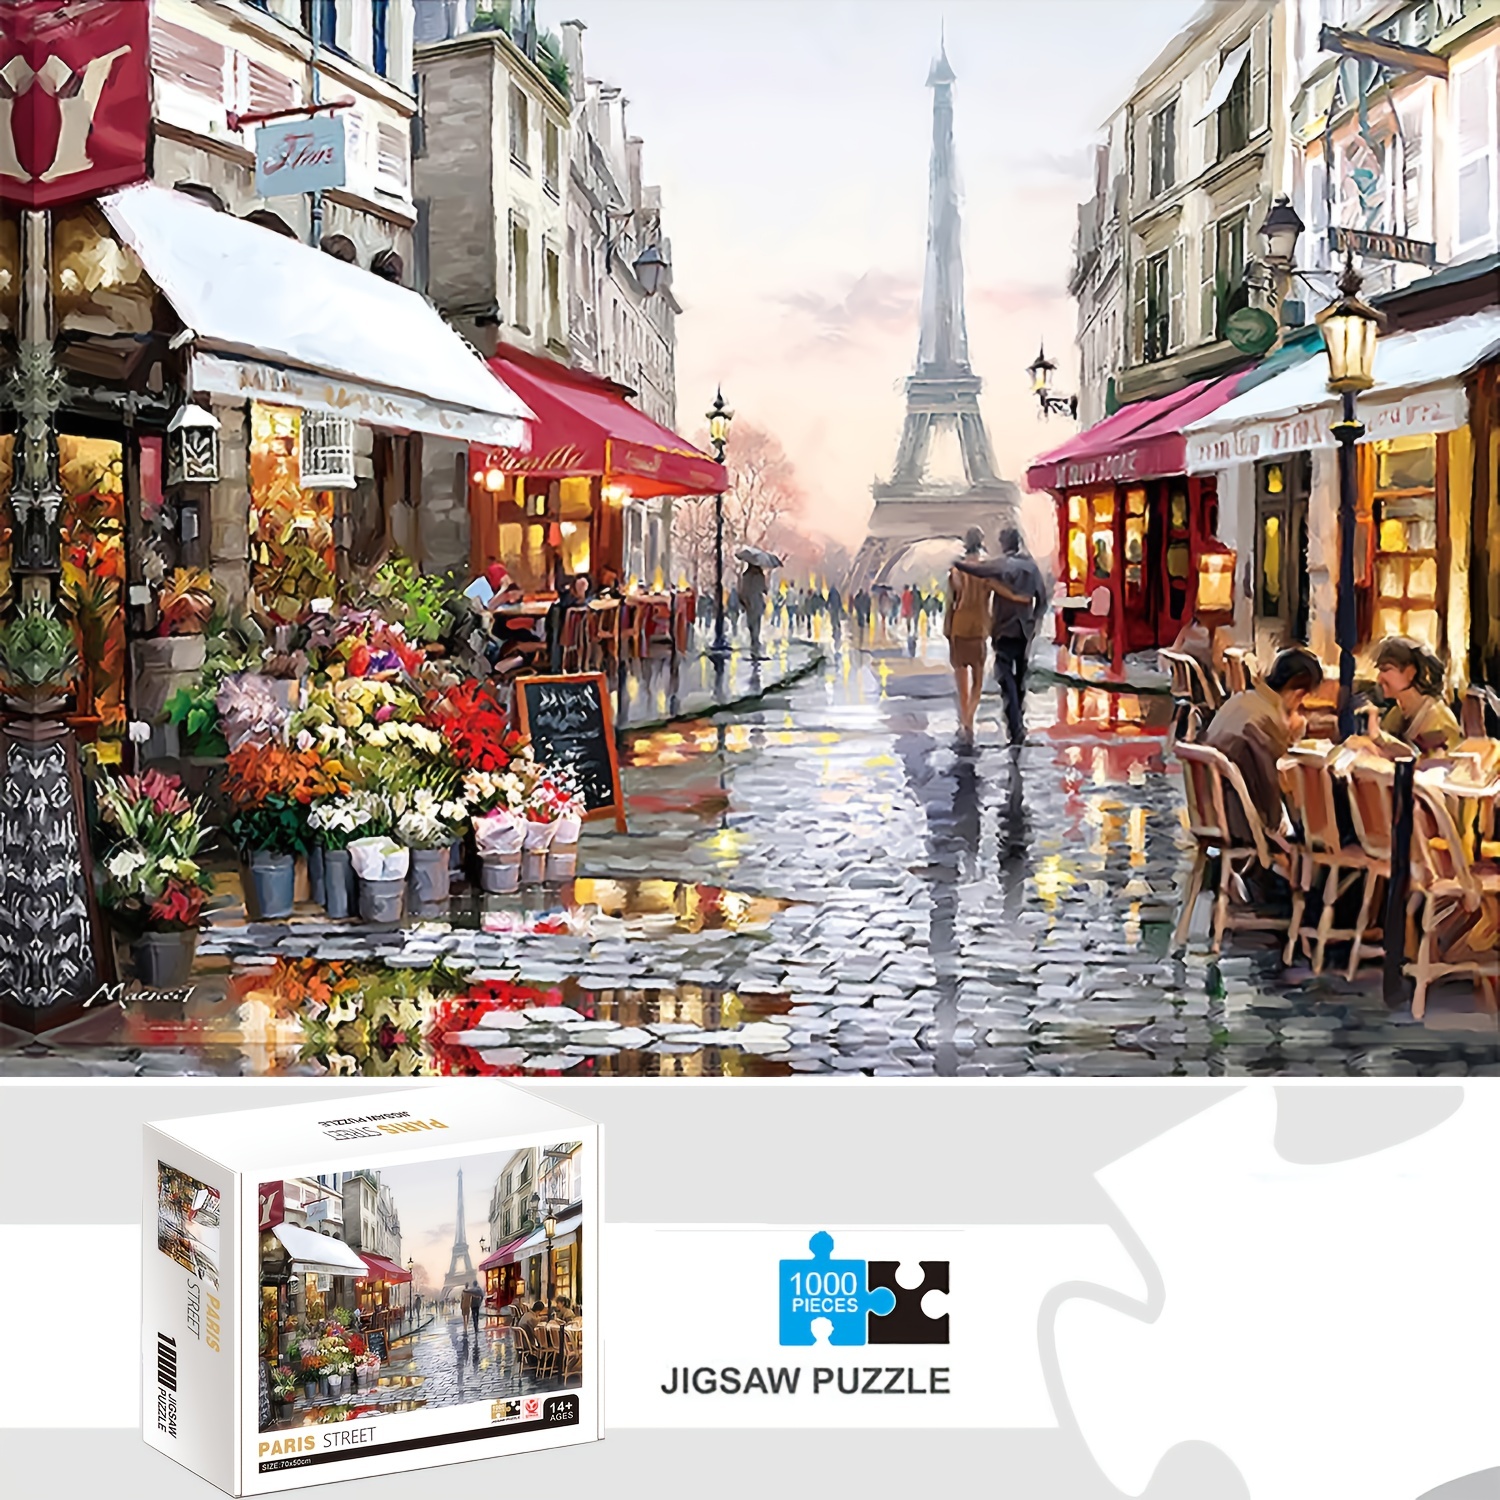 

1000pcs Paris Street Puzzles, Thick And Durable Seamless Jigsaw Puzzles For Adults Premium Quality Fun Family Challenging Puzzles For Birthday, Christmas, Halloween